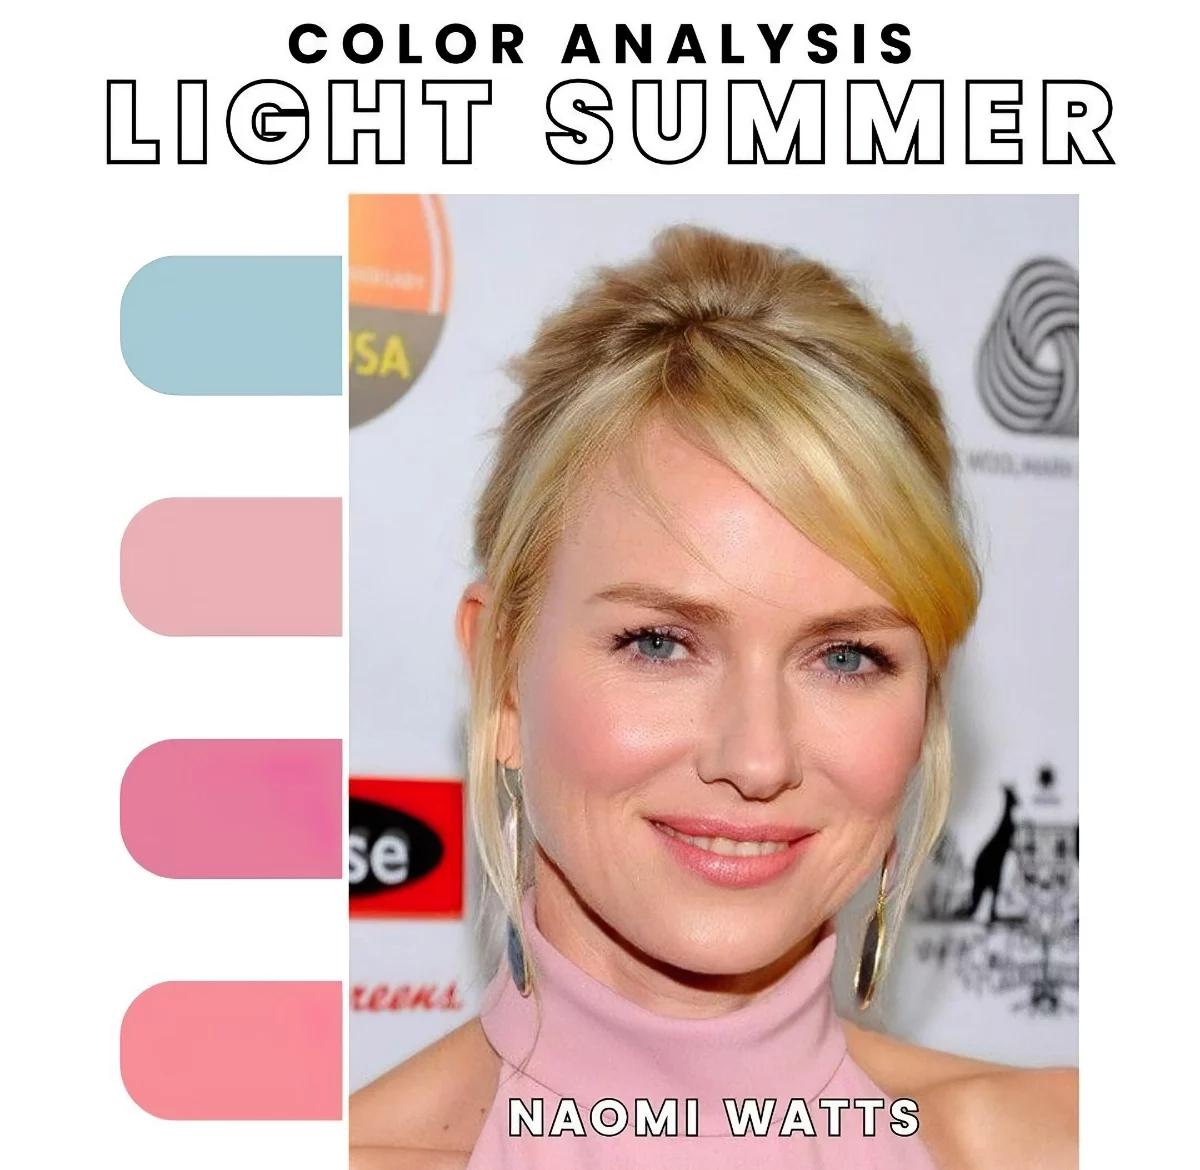 sommertyp welche farben light summer farbenanalyse thecolorkey 